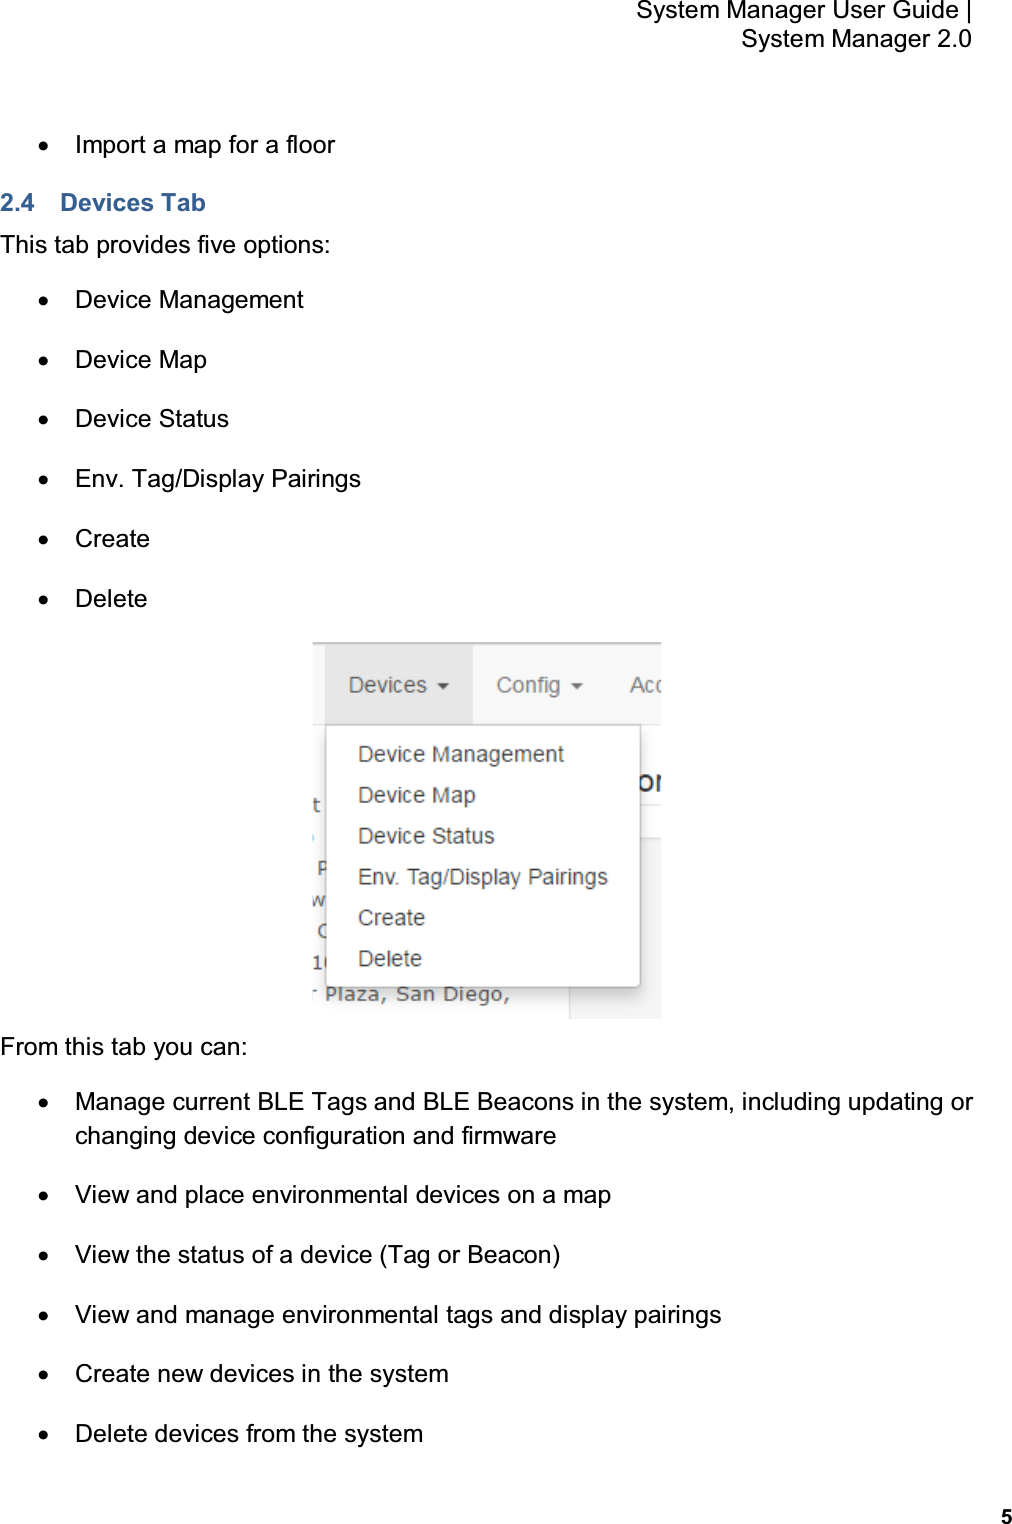           5 System Manager User Guide |  System Manager 2.0 •  Import a map for a floor 2.4  Devices Tab This tab provides five options: •  Device Management •  Device Map •  Device Status •  Env. Tag/Display Pairings •  Create  •  Delete   From this tab you can: •  Manage current BLE Tags and BLE Beacons in the system, including updating or changing device configuration and firmware •  View and place environmental devices on a map •  View the status of a device (Tag or Beacon) •  View and manage environmental tags and display pairings •  Create new devices in the system •  Delete devices from the system 